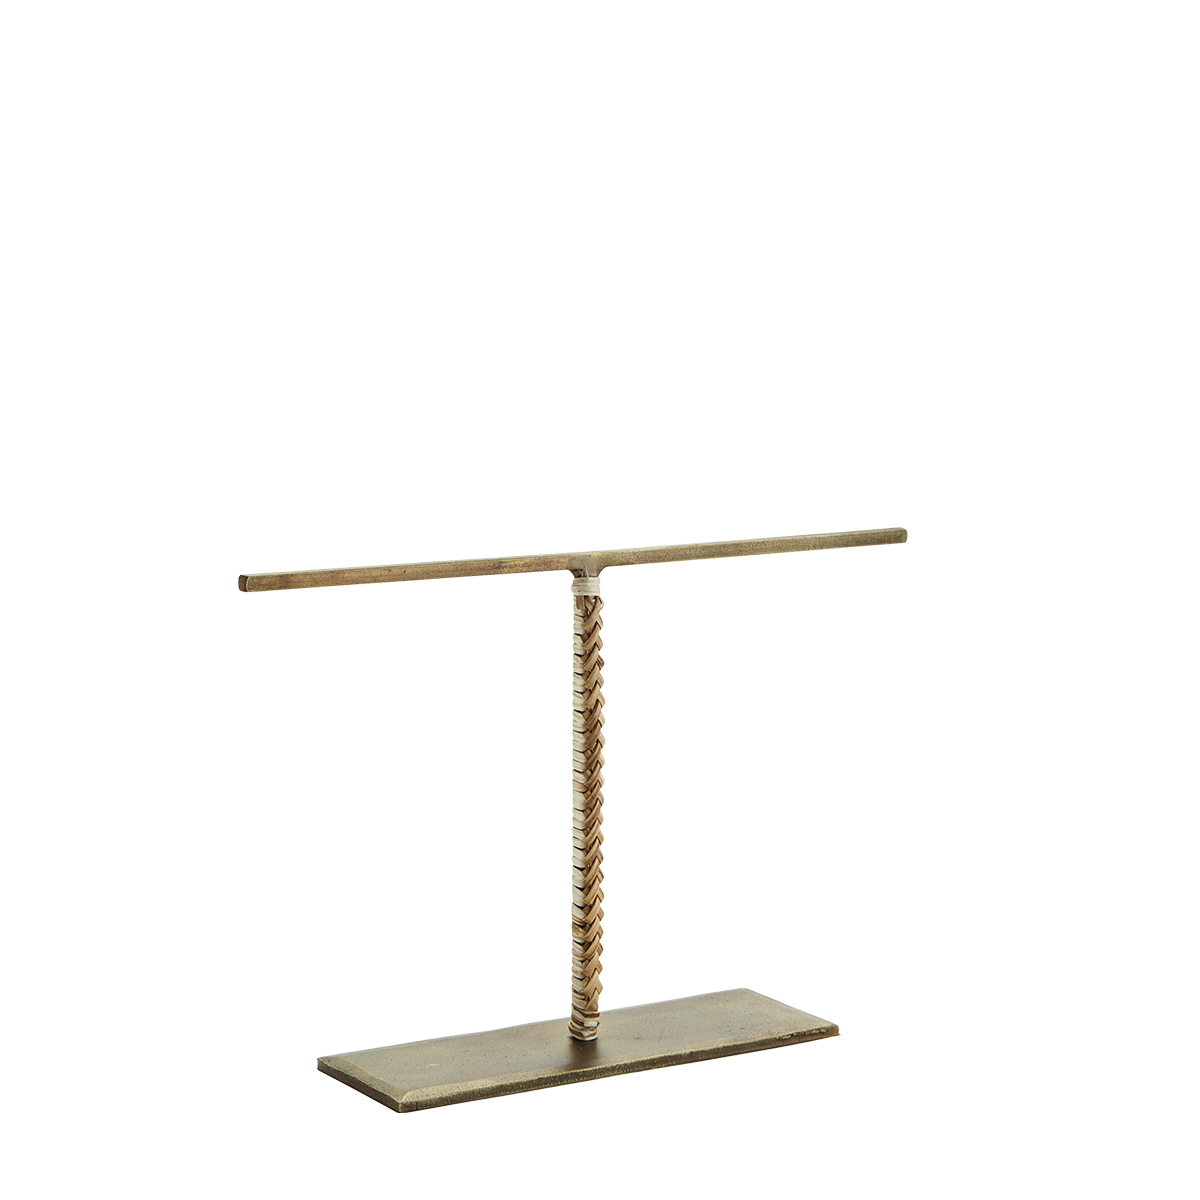 Hand forged jewellery stand w/ cane